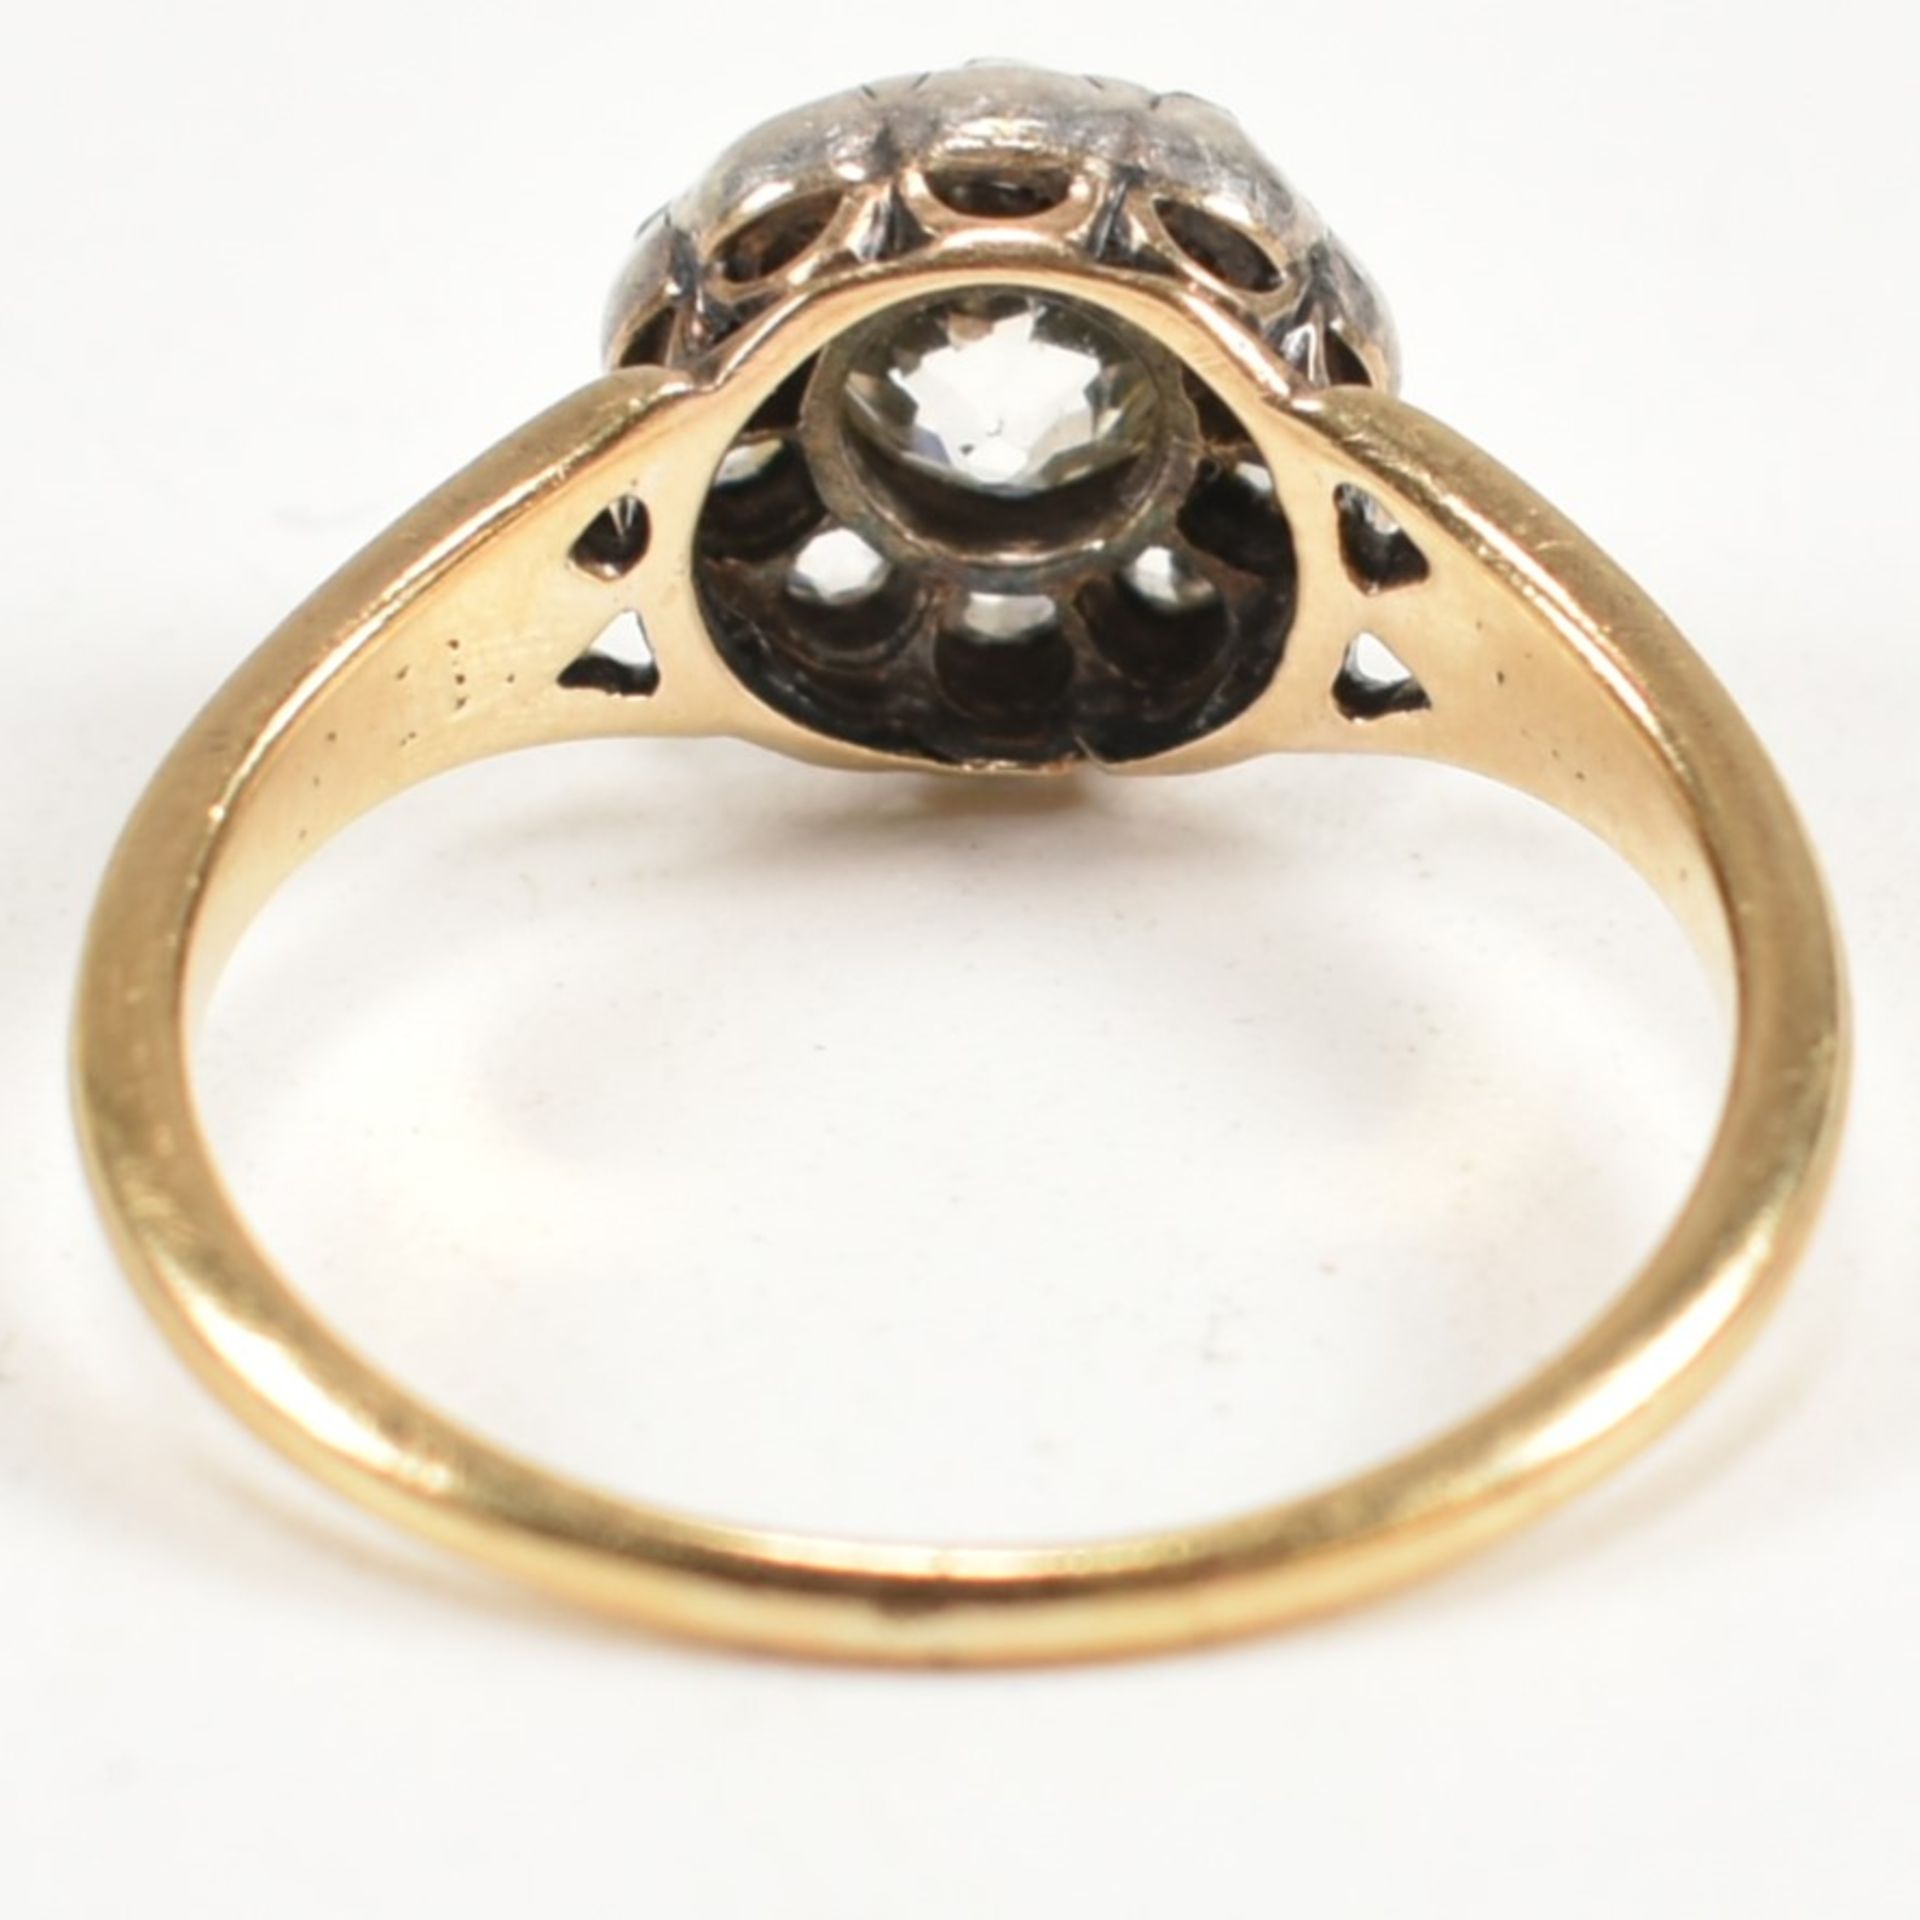 GOLD & DIAMOND CLUSTER RING - Image 3 of 8